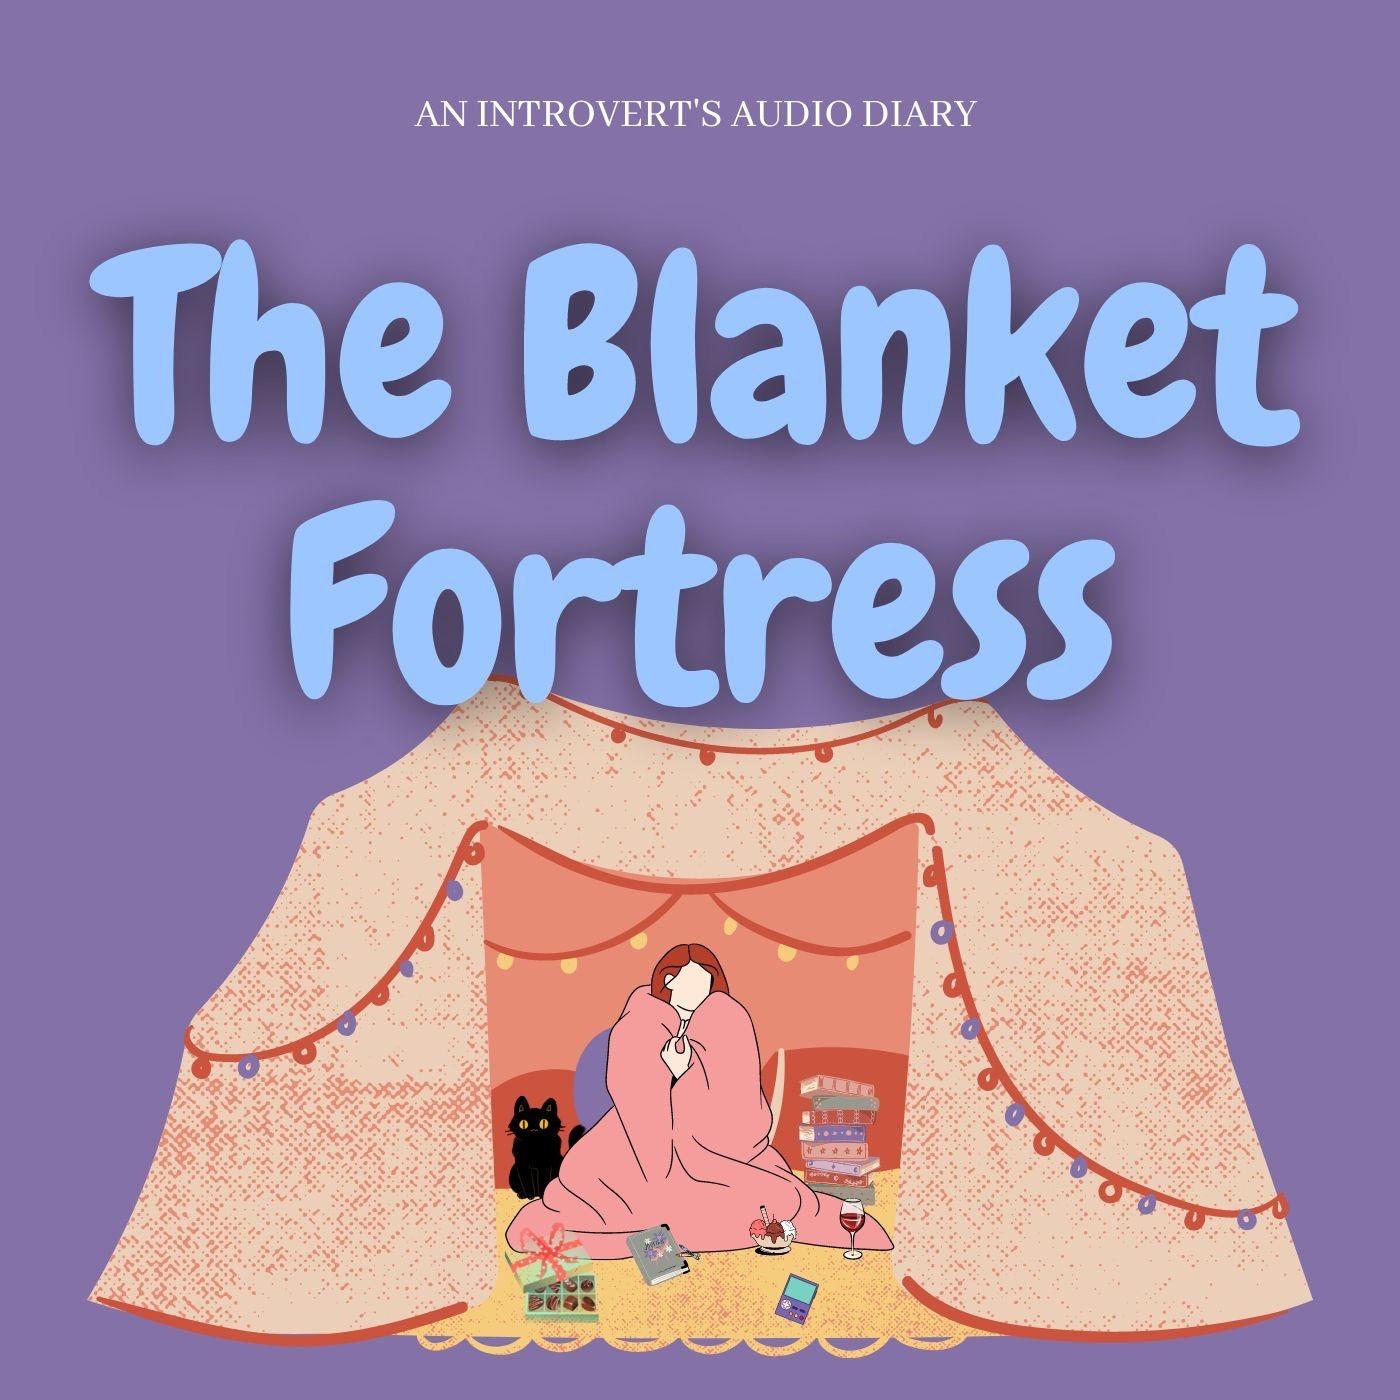 The Blanket Fortress (An Introvert’s Audio Diary)